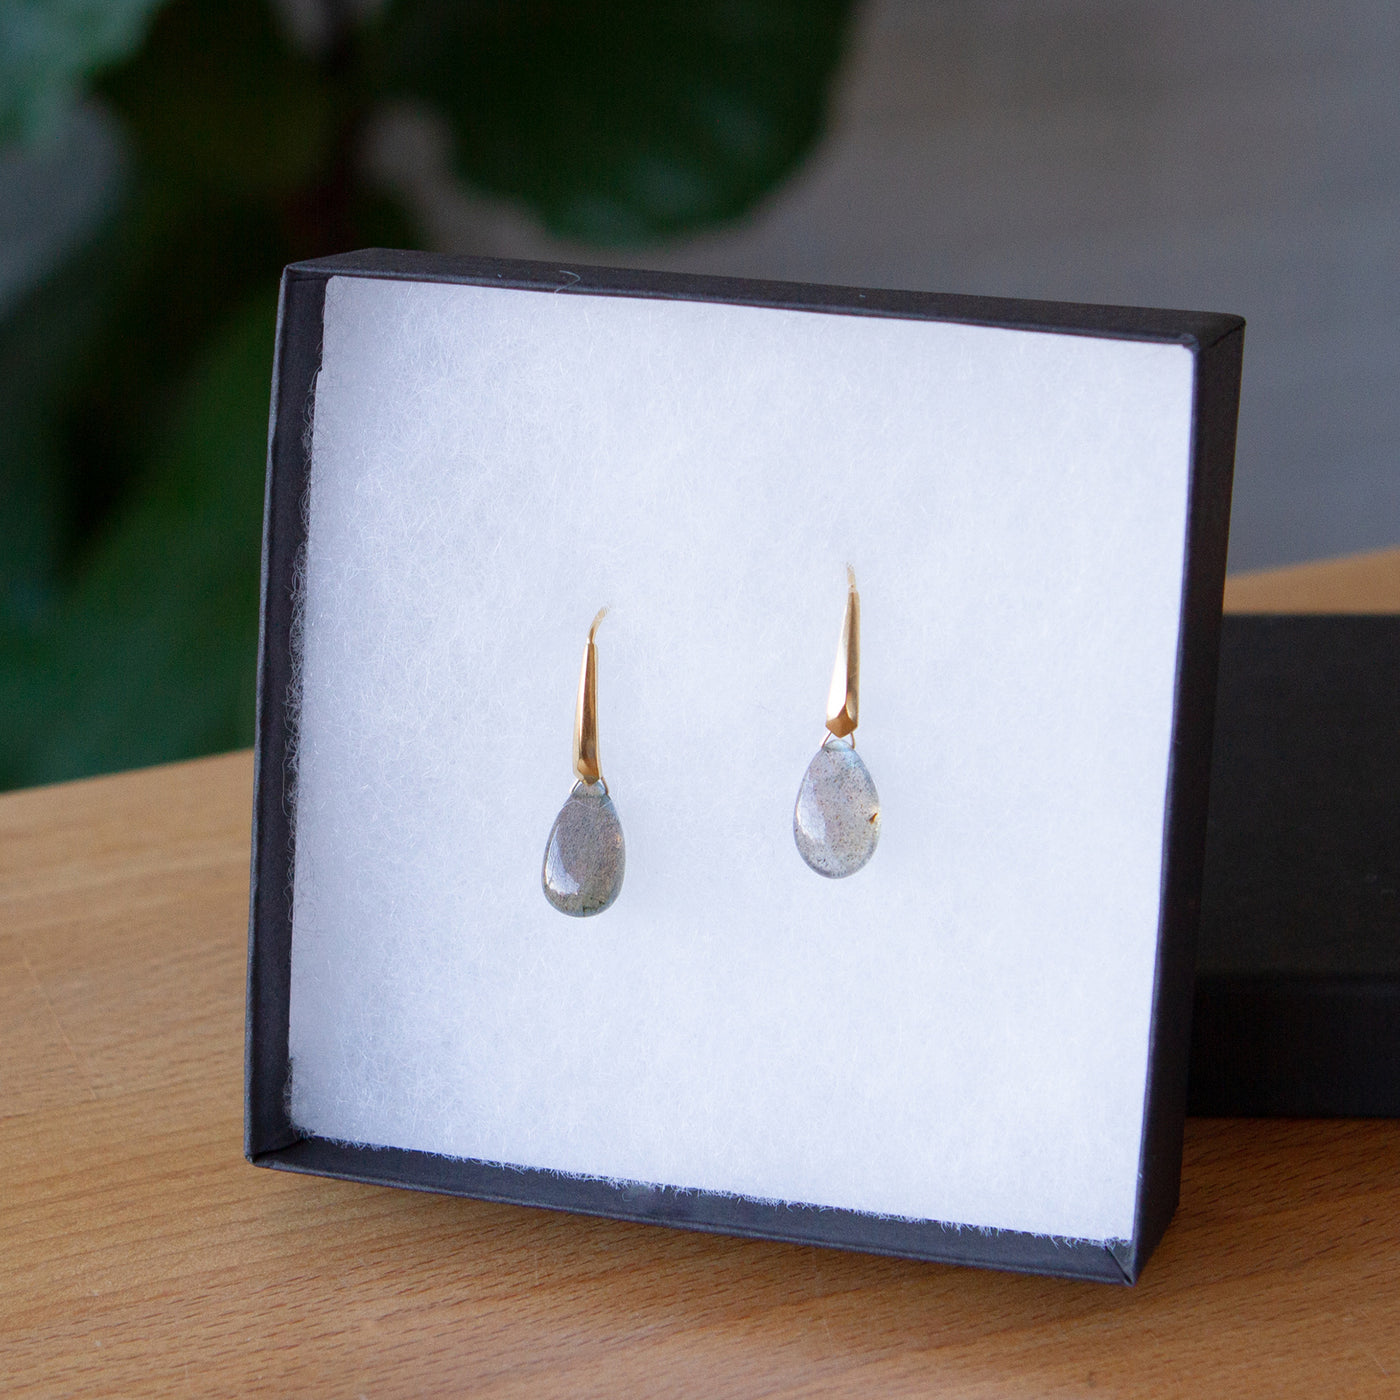 Labradorite earrings in gold vermeil propped up in a jewelry box on a wooden table